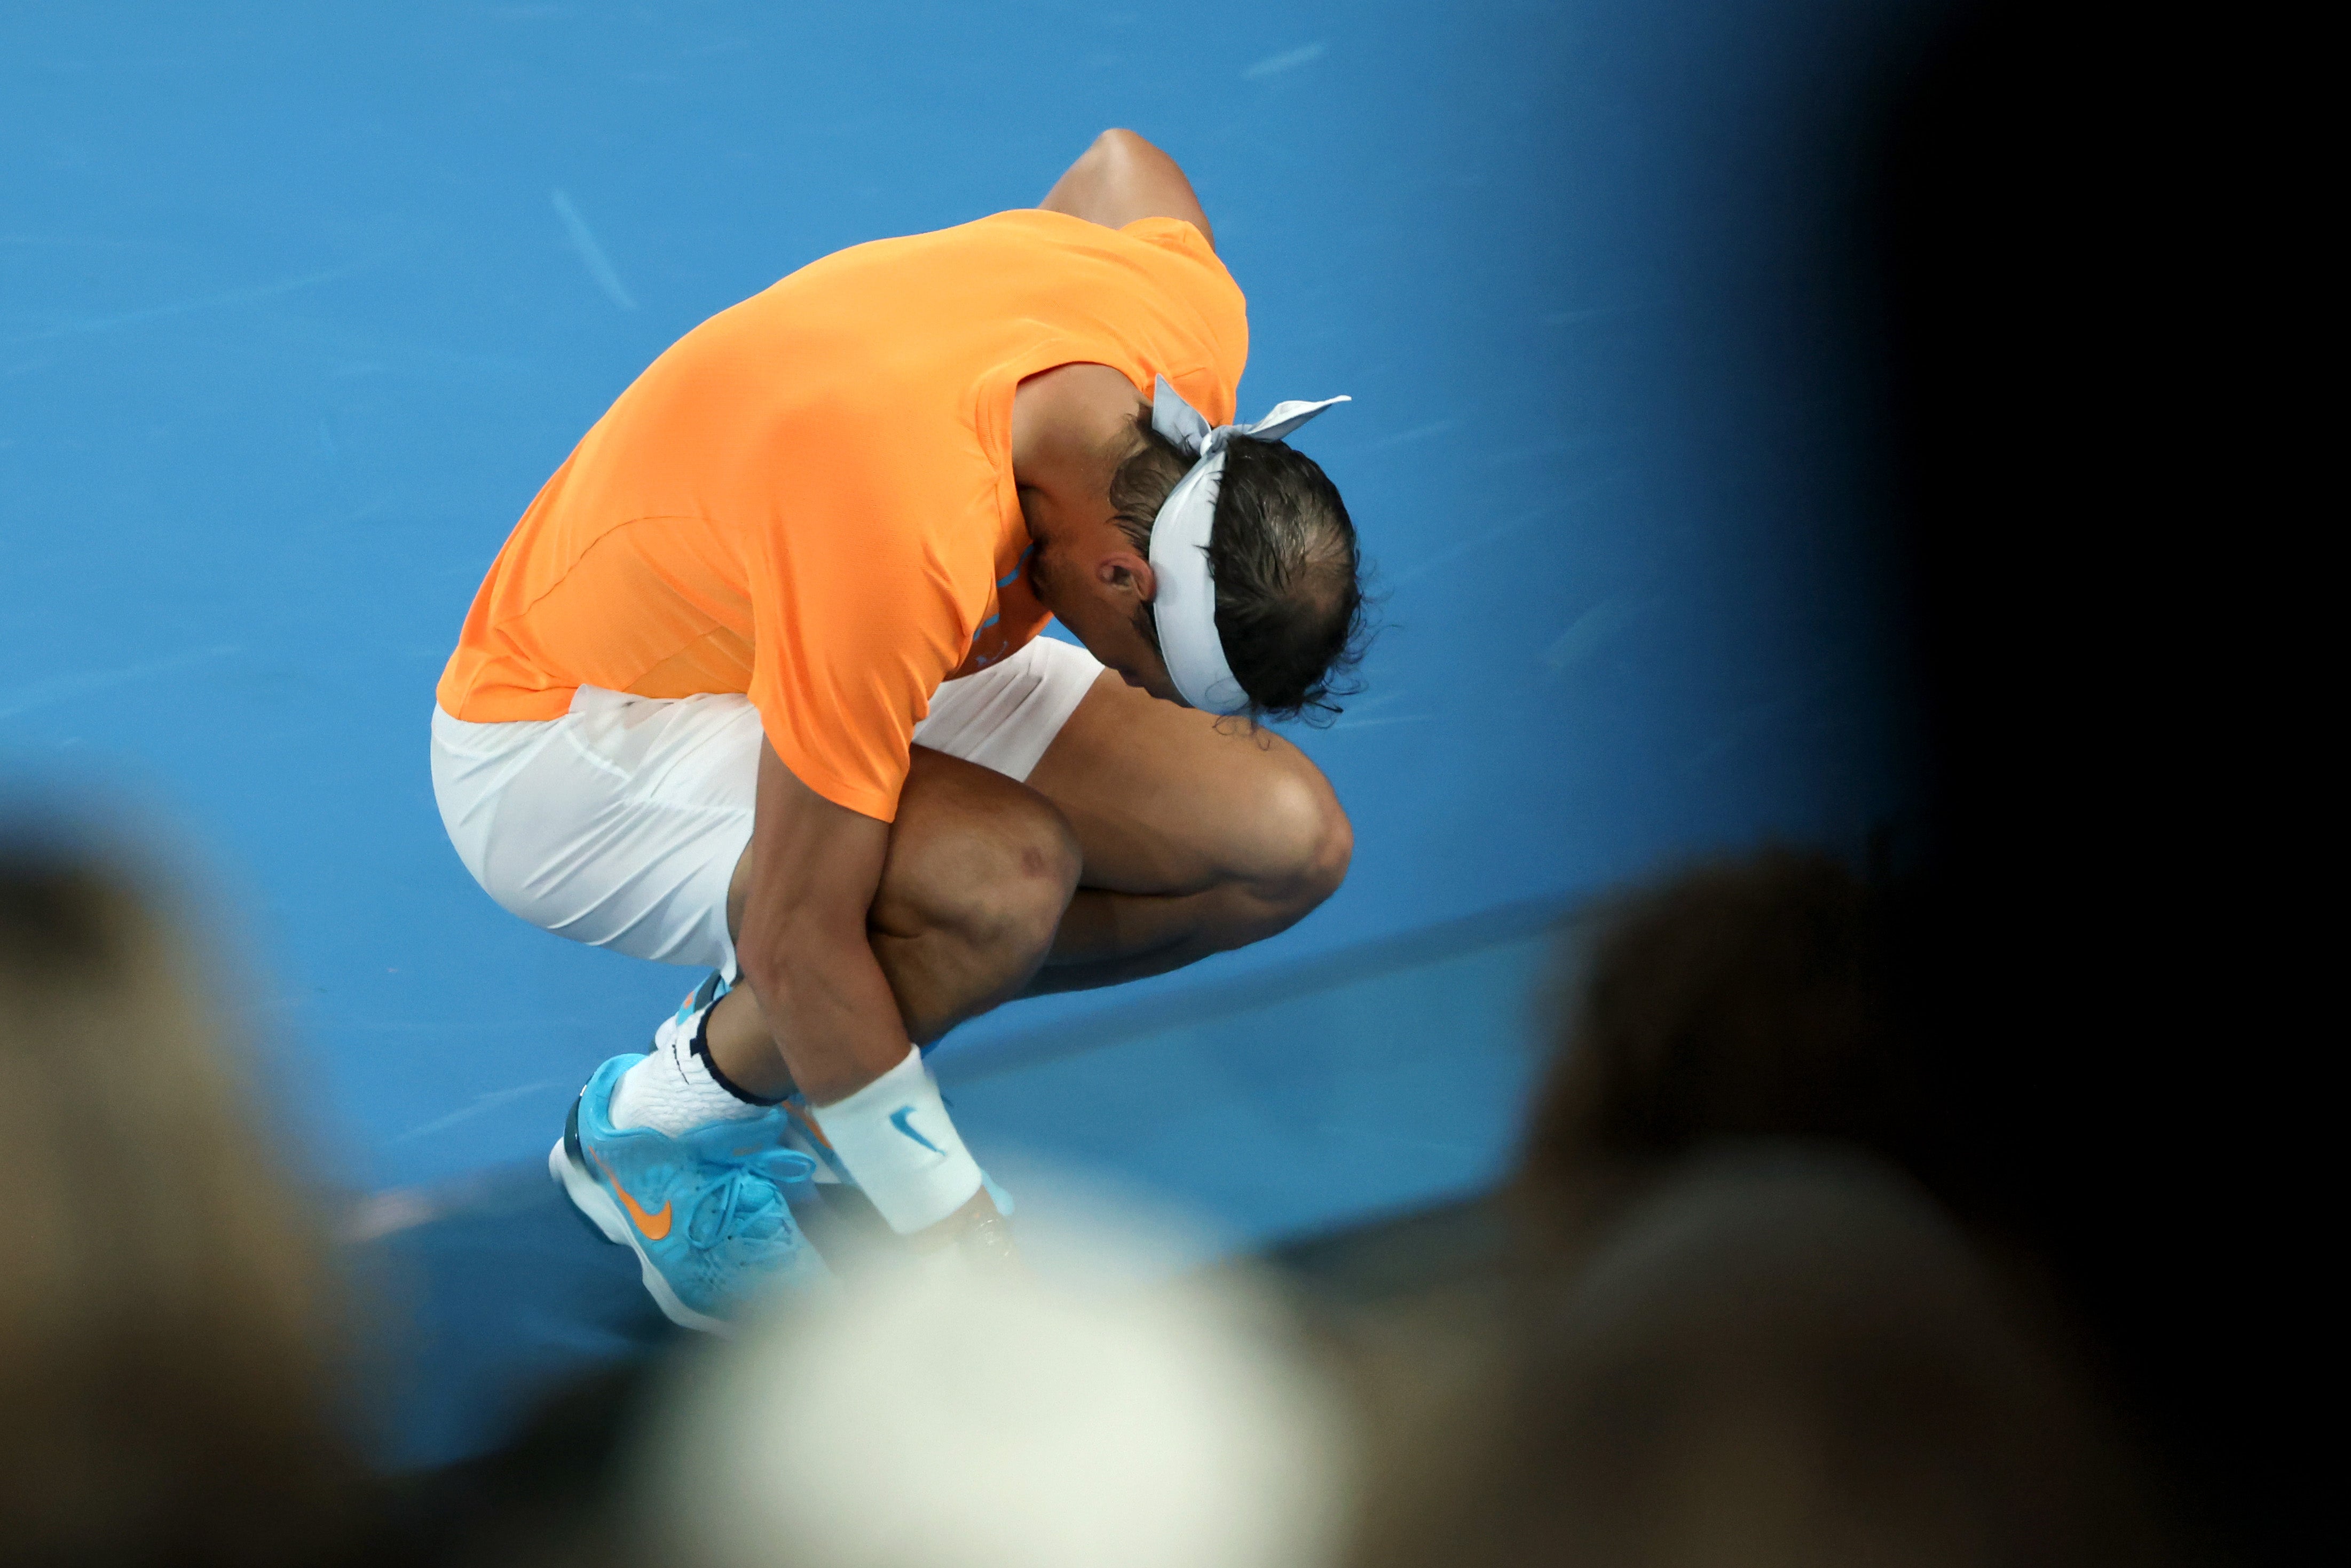 Rafael Nadal has not played since the Australian Open in January